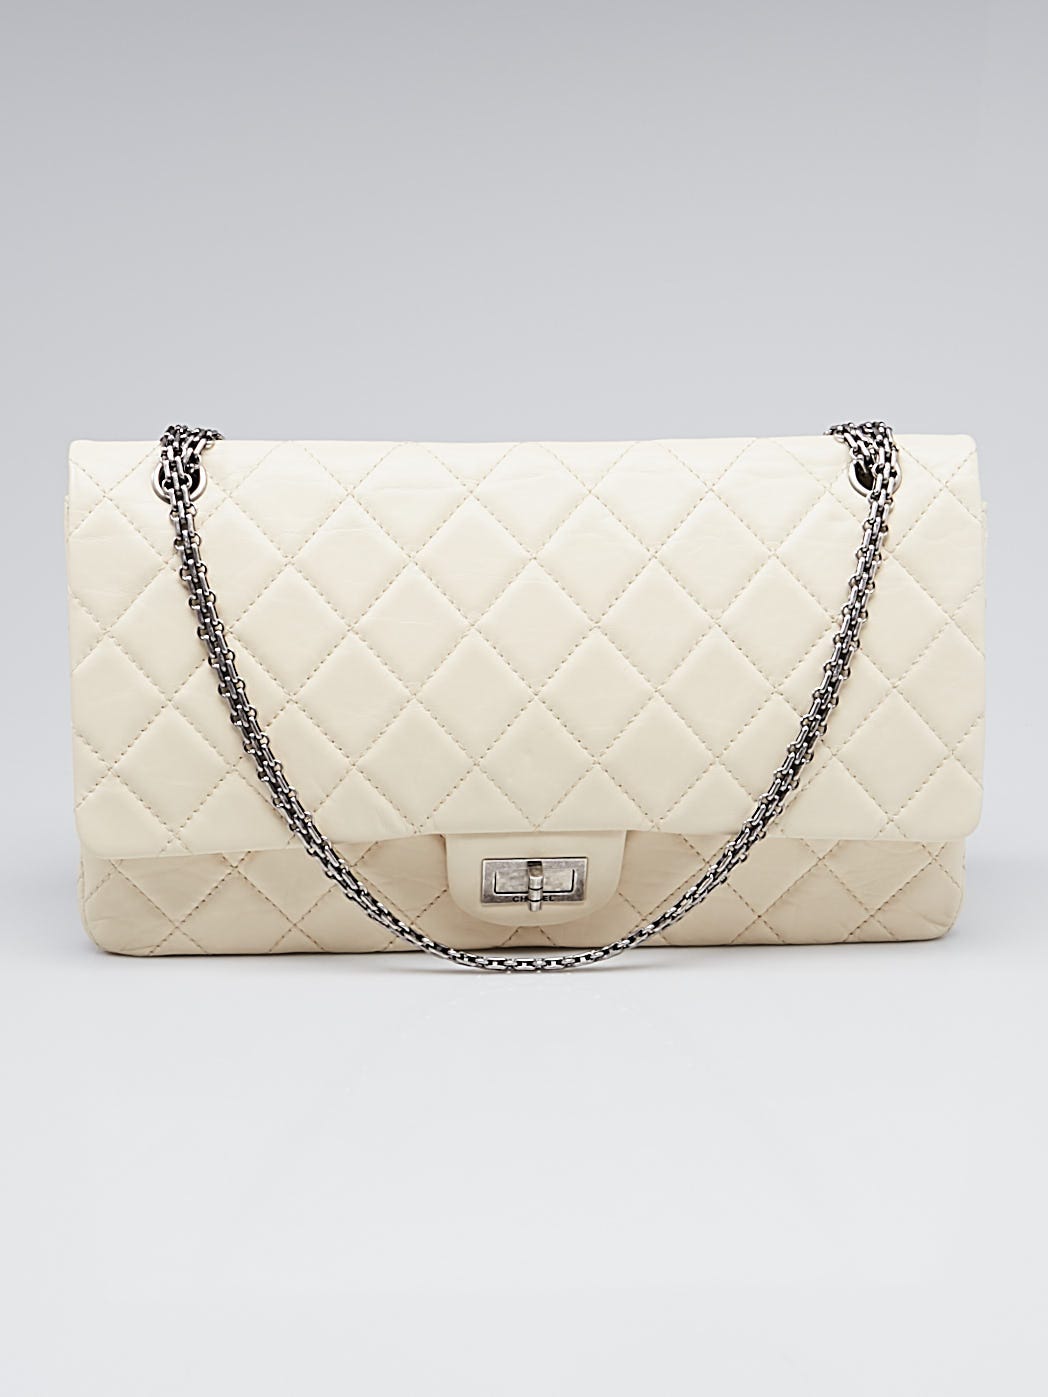 Chanel Beige Age Calfskin Large 255 ReissueHandbag Large  My Paris  Branded StationSell Your Bags And Get Instant Cash